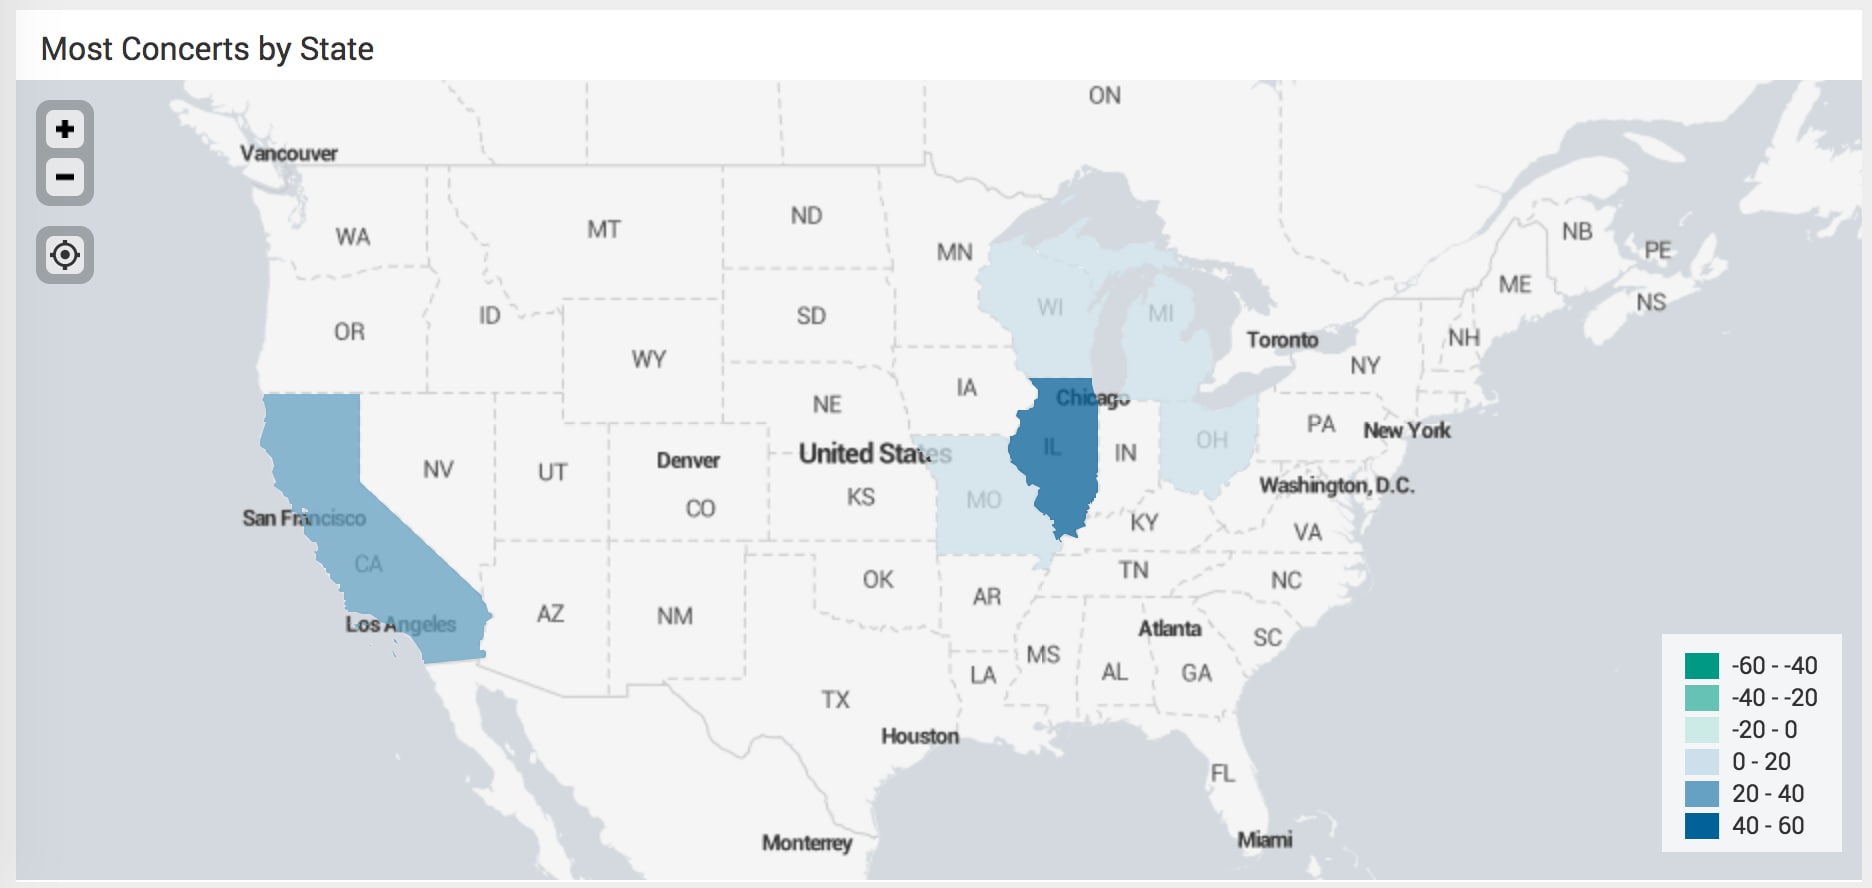 This screen capture shows a map of the United States with darker states of California, Illinois, Michigan, Wisconsin, Ohio, and Missouri to indicate states that I've attended shows in. Illinois is the darkest, followed by California and Michigan.